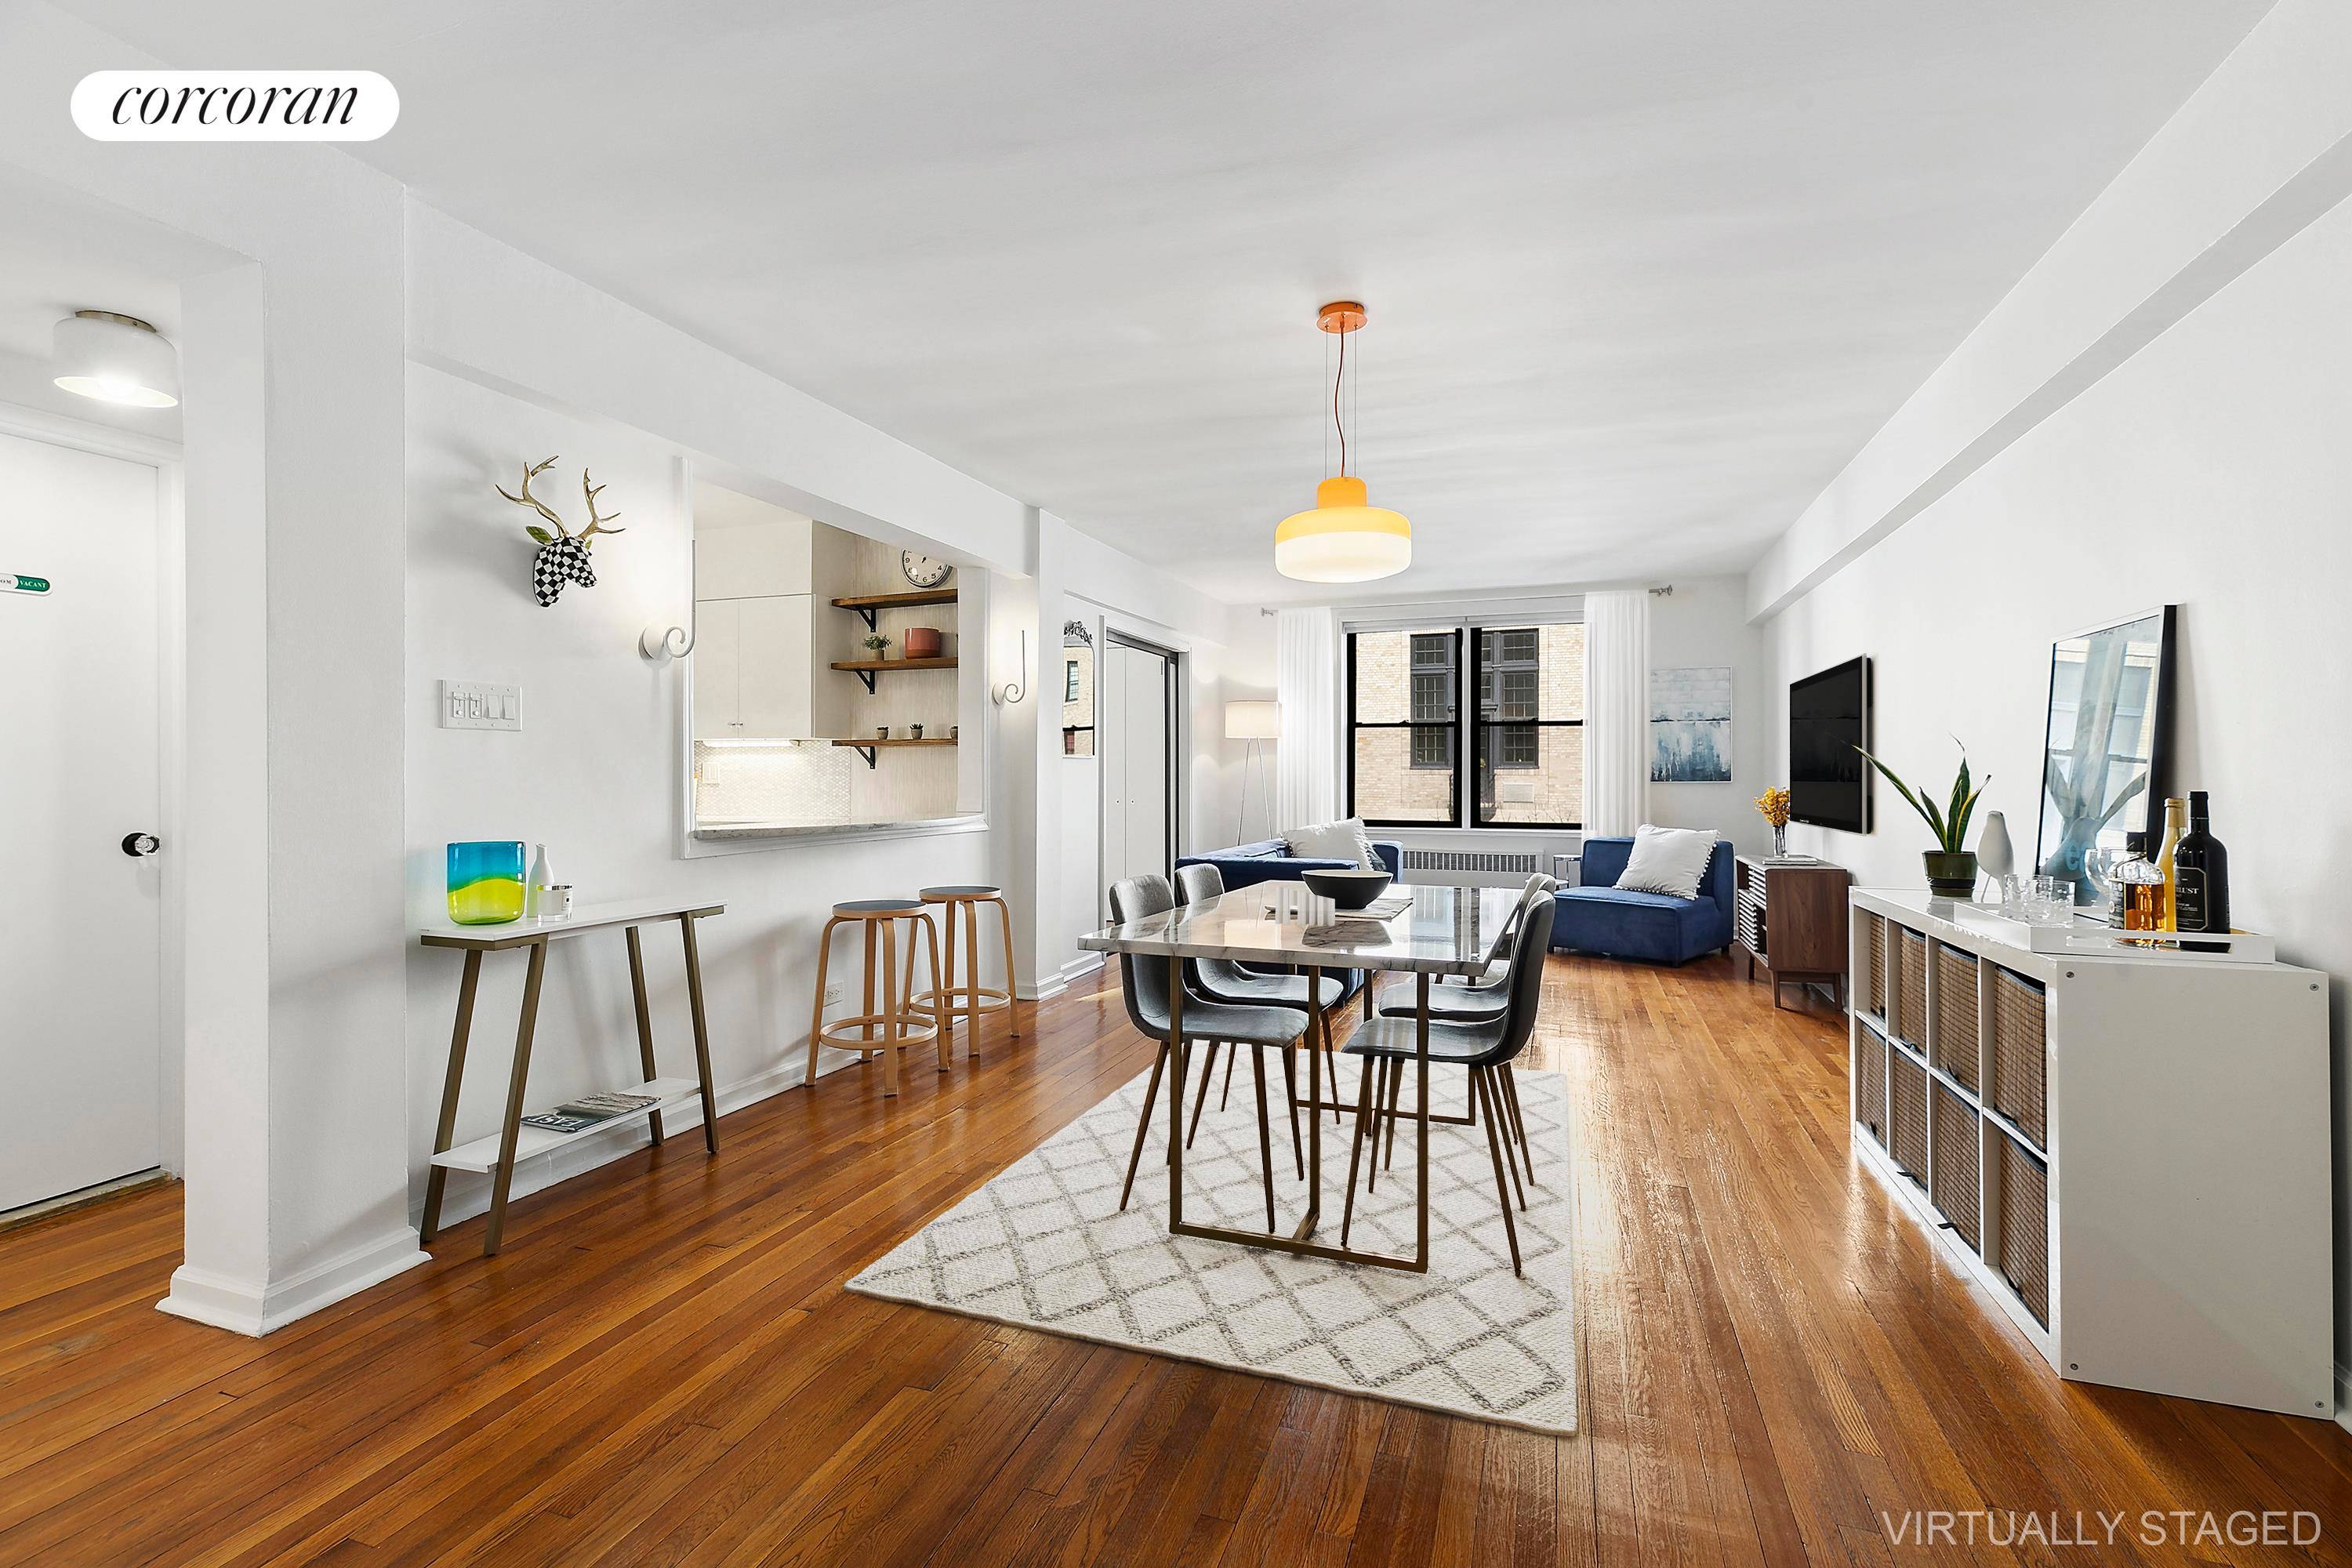 Move in Ready ! 30 East 9th Street, 4B is a stylish GV 2 Bedroom, 1 bath converted from a XL 1BR Dining Alcove at The Lafayette has been reimagined ...